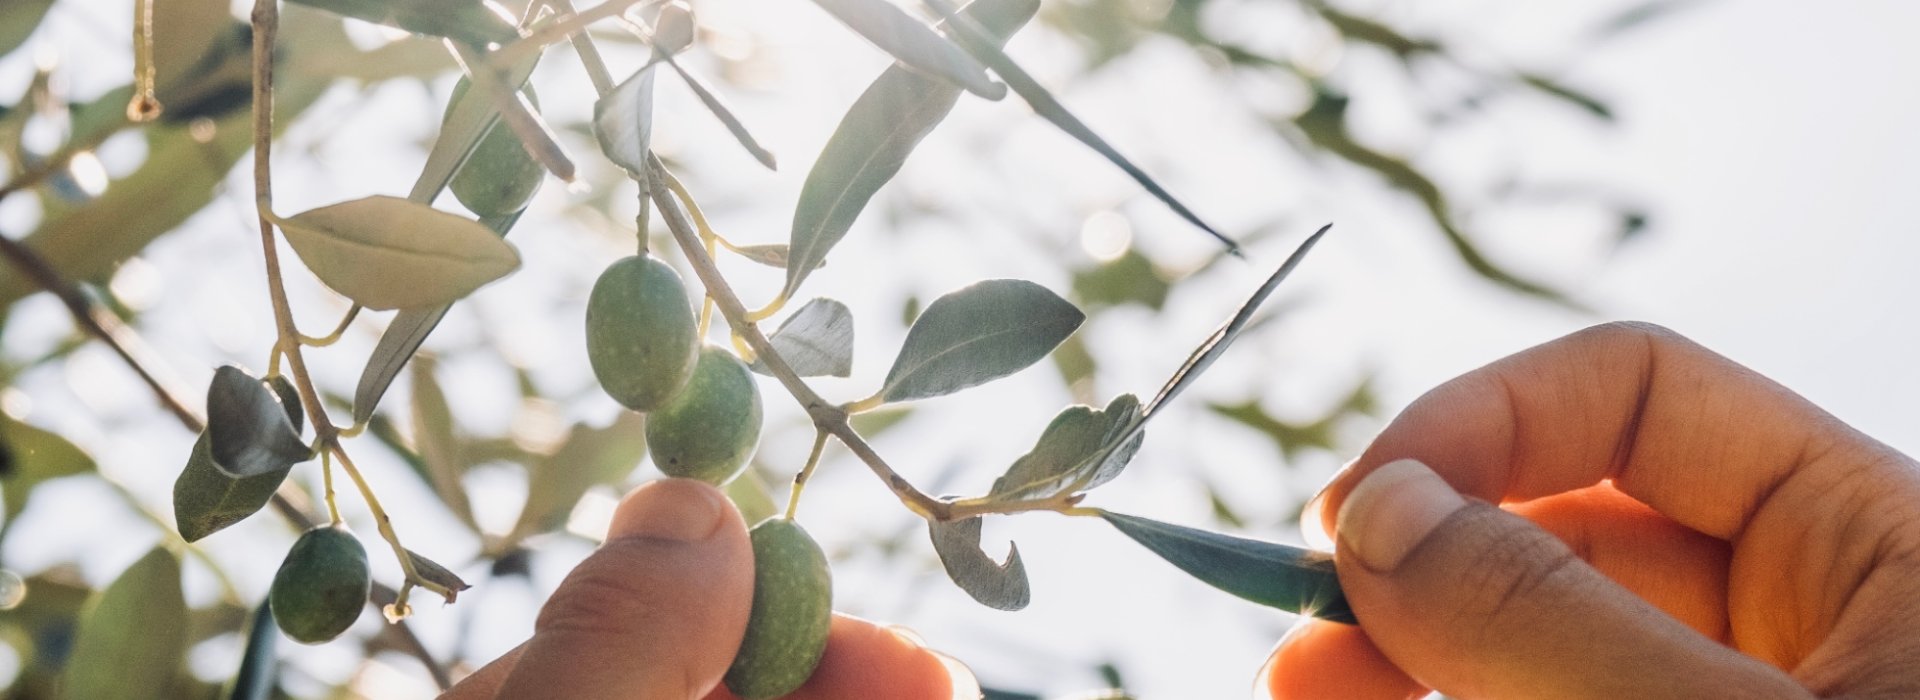 Participate to the harvesting and pressing of olives in our olive grove in Volterra, in the heart of Tuscany.